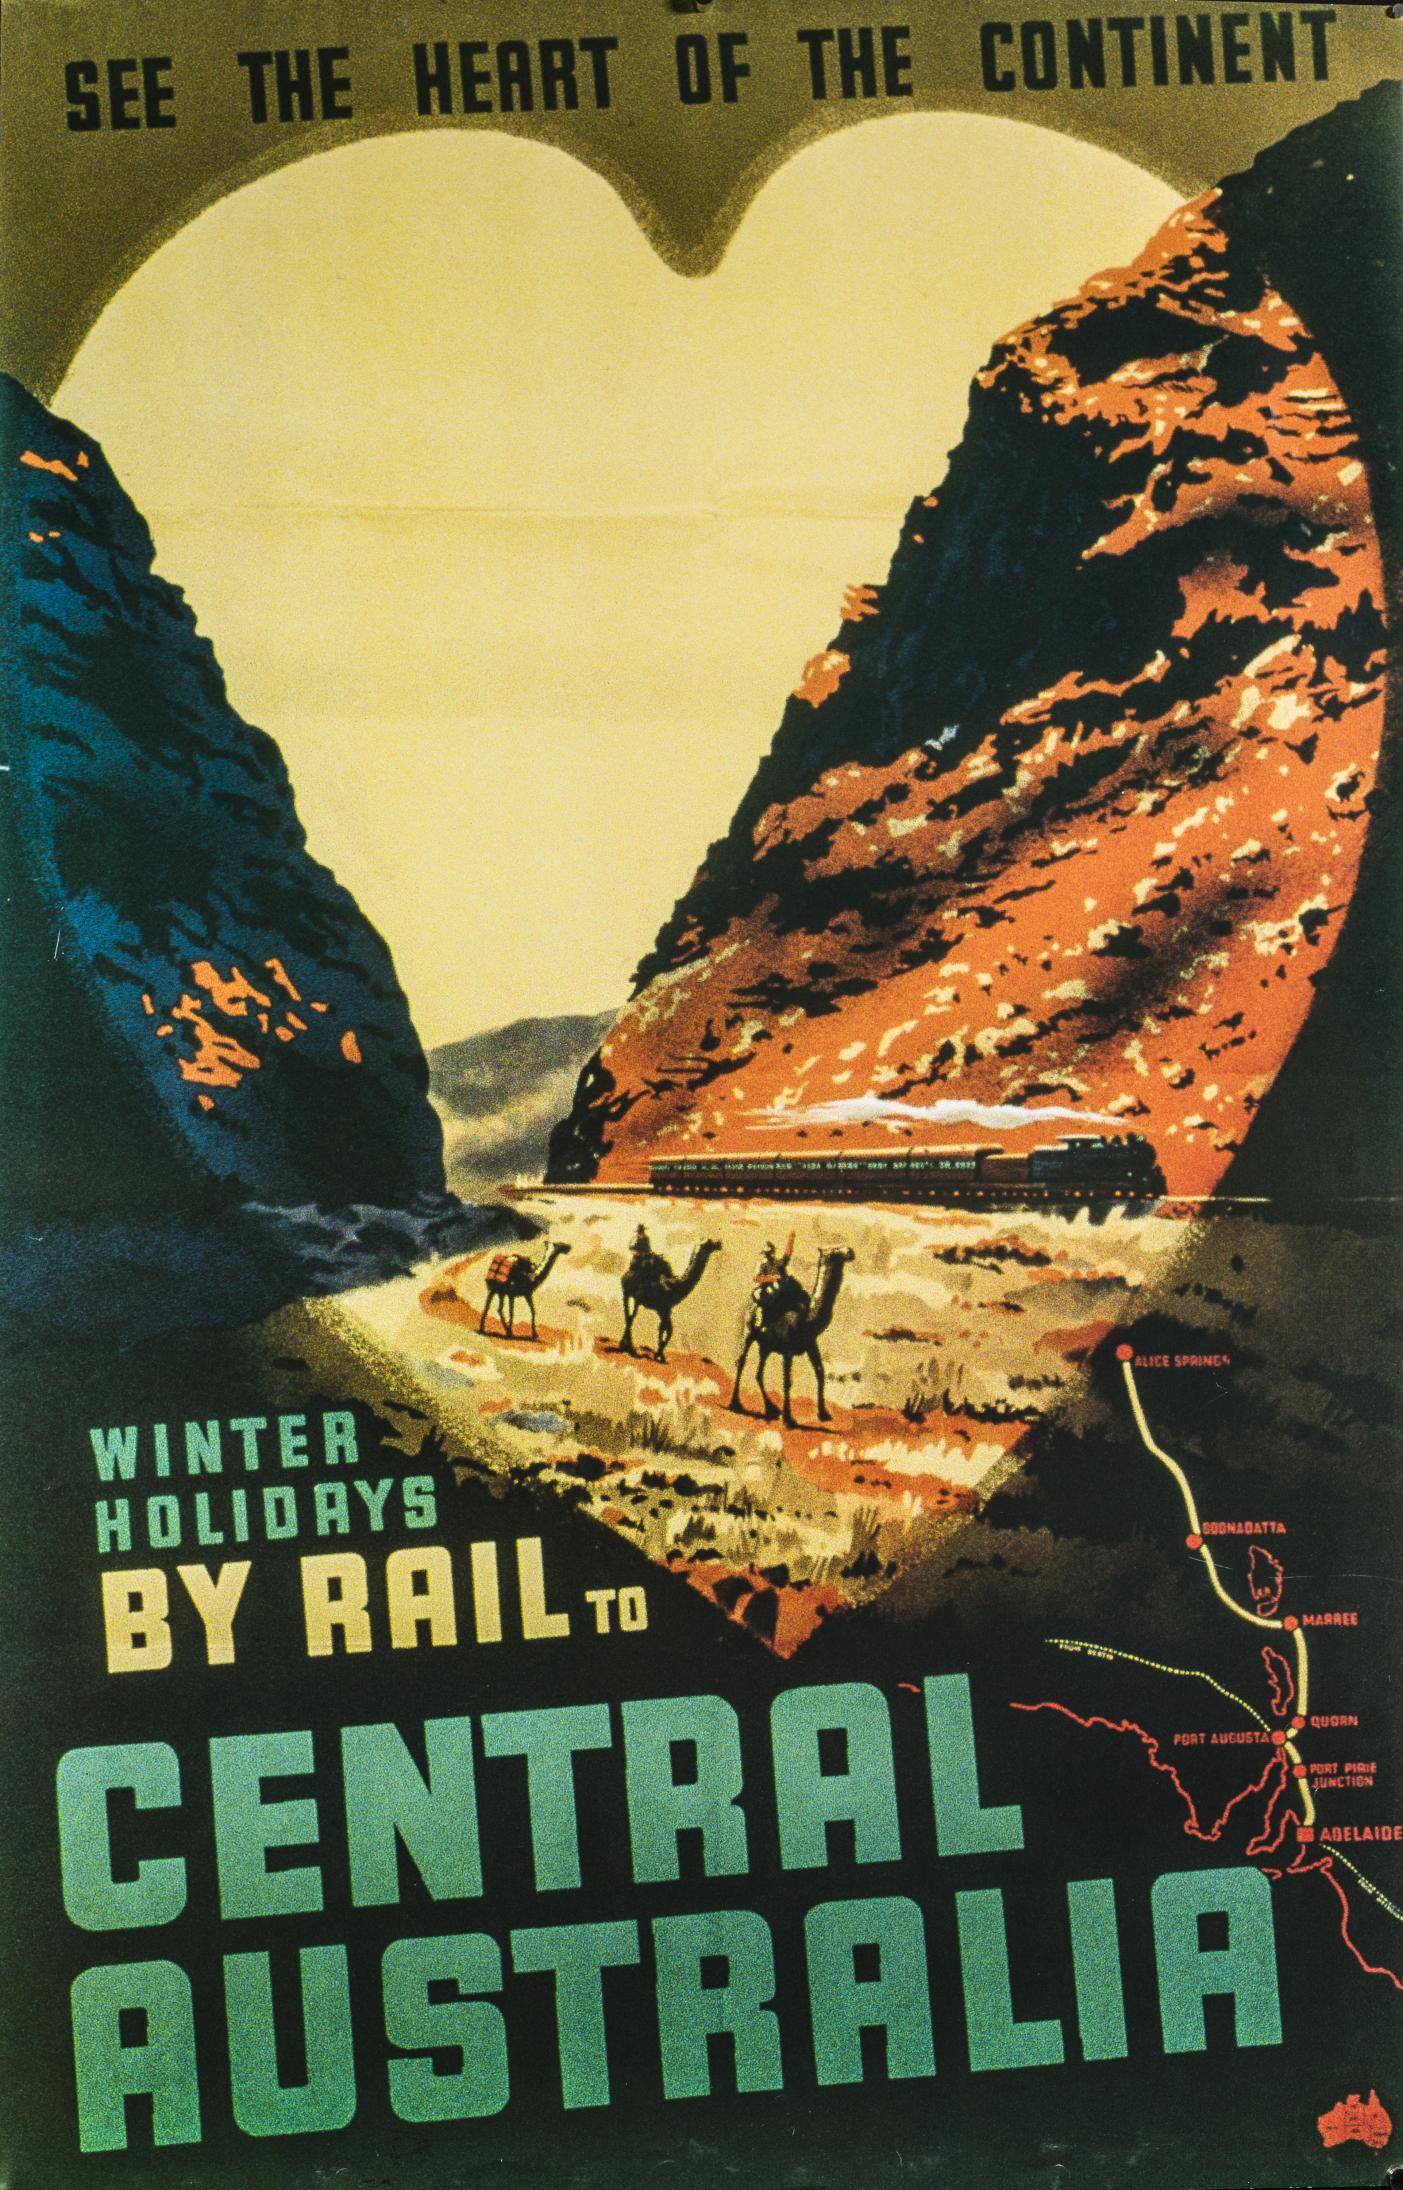 Tourism poster from 1959 promoting travel in Central Australian. Camels in the foreground and a train in the background. 